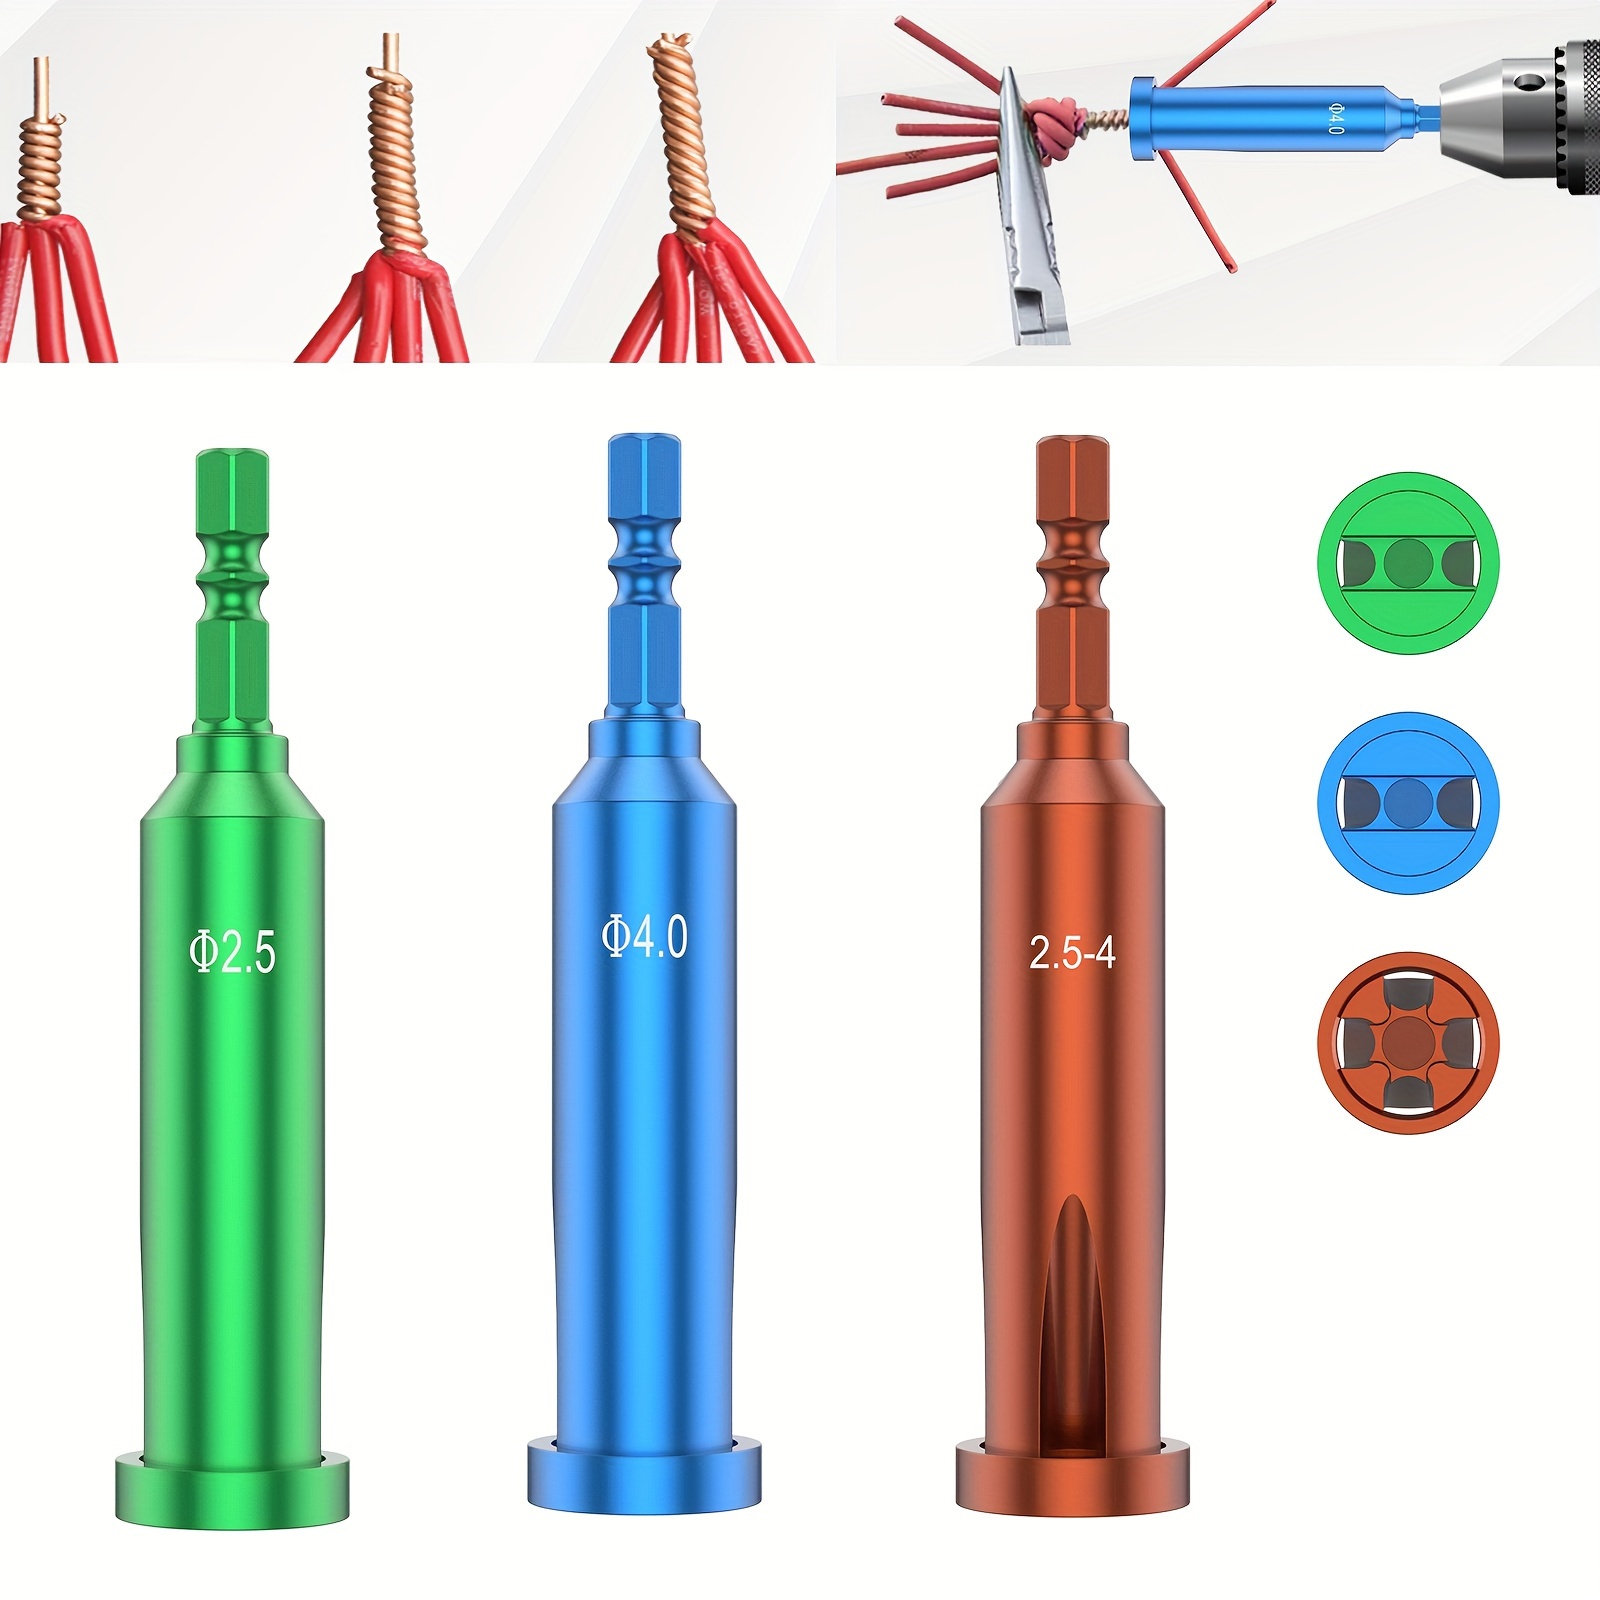 Wire Twisting Tool, Wire Stripper And Twister For Power Drill Drivers Tool,  4 Square 3 Way / 5 Way Twister, Stripping And Twist Wire Cable Tools 3pcs